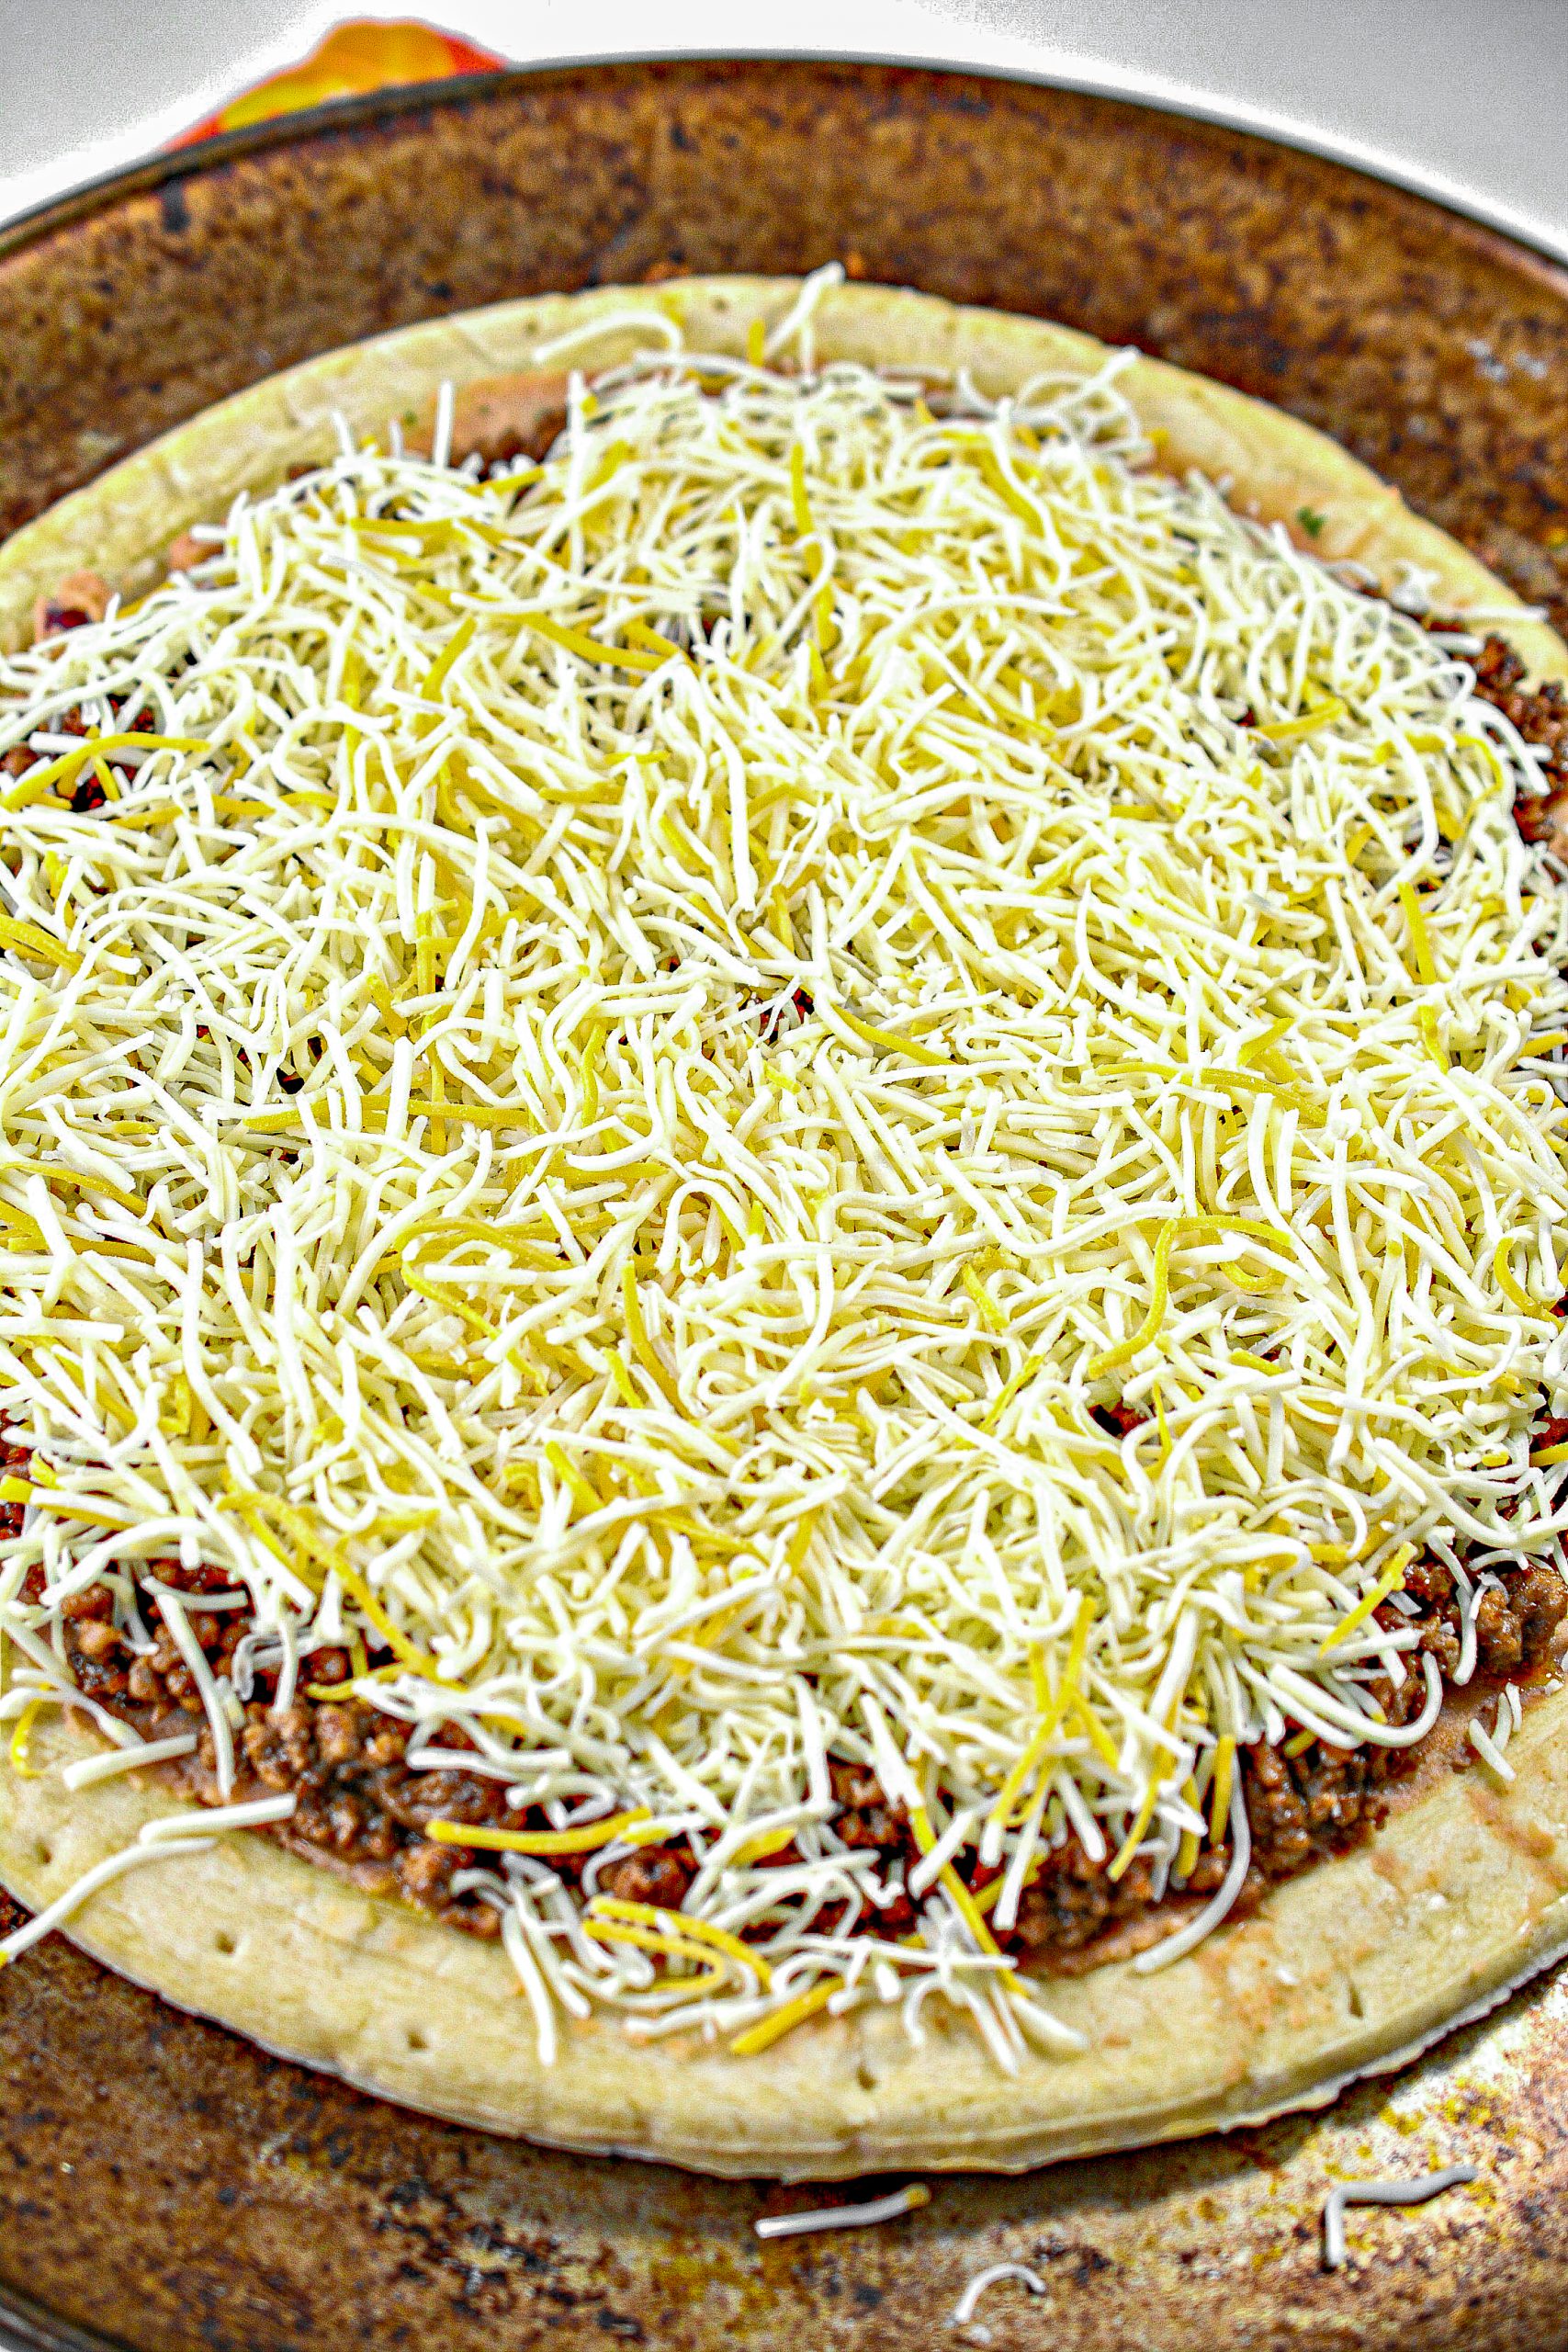 Sprinkle the cheese on top, and bake for 10-12 minutes until the cheese is completely melted.